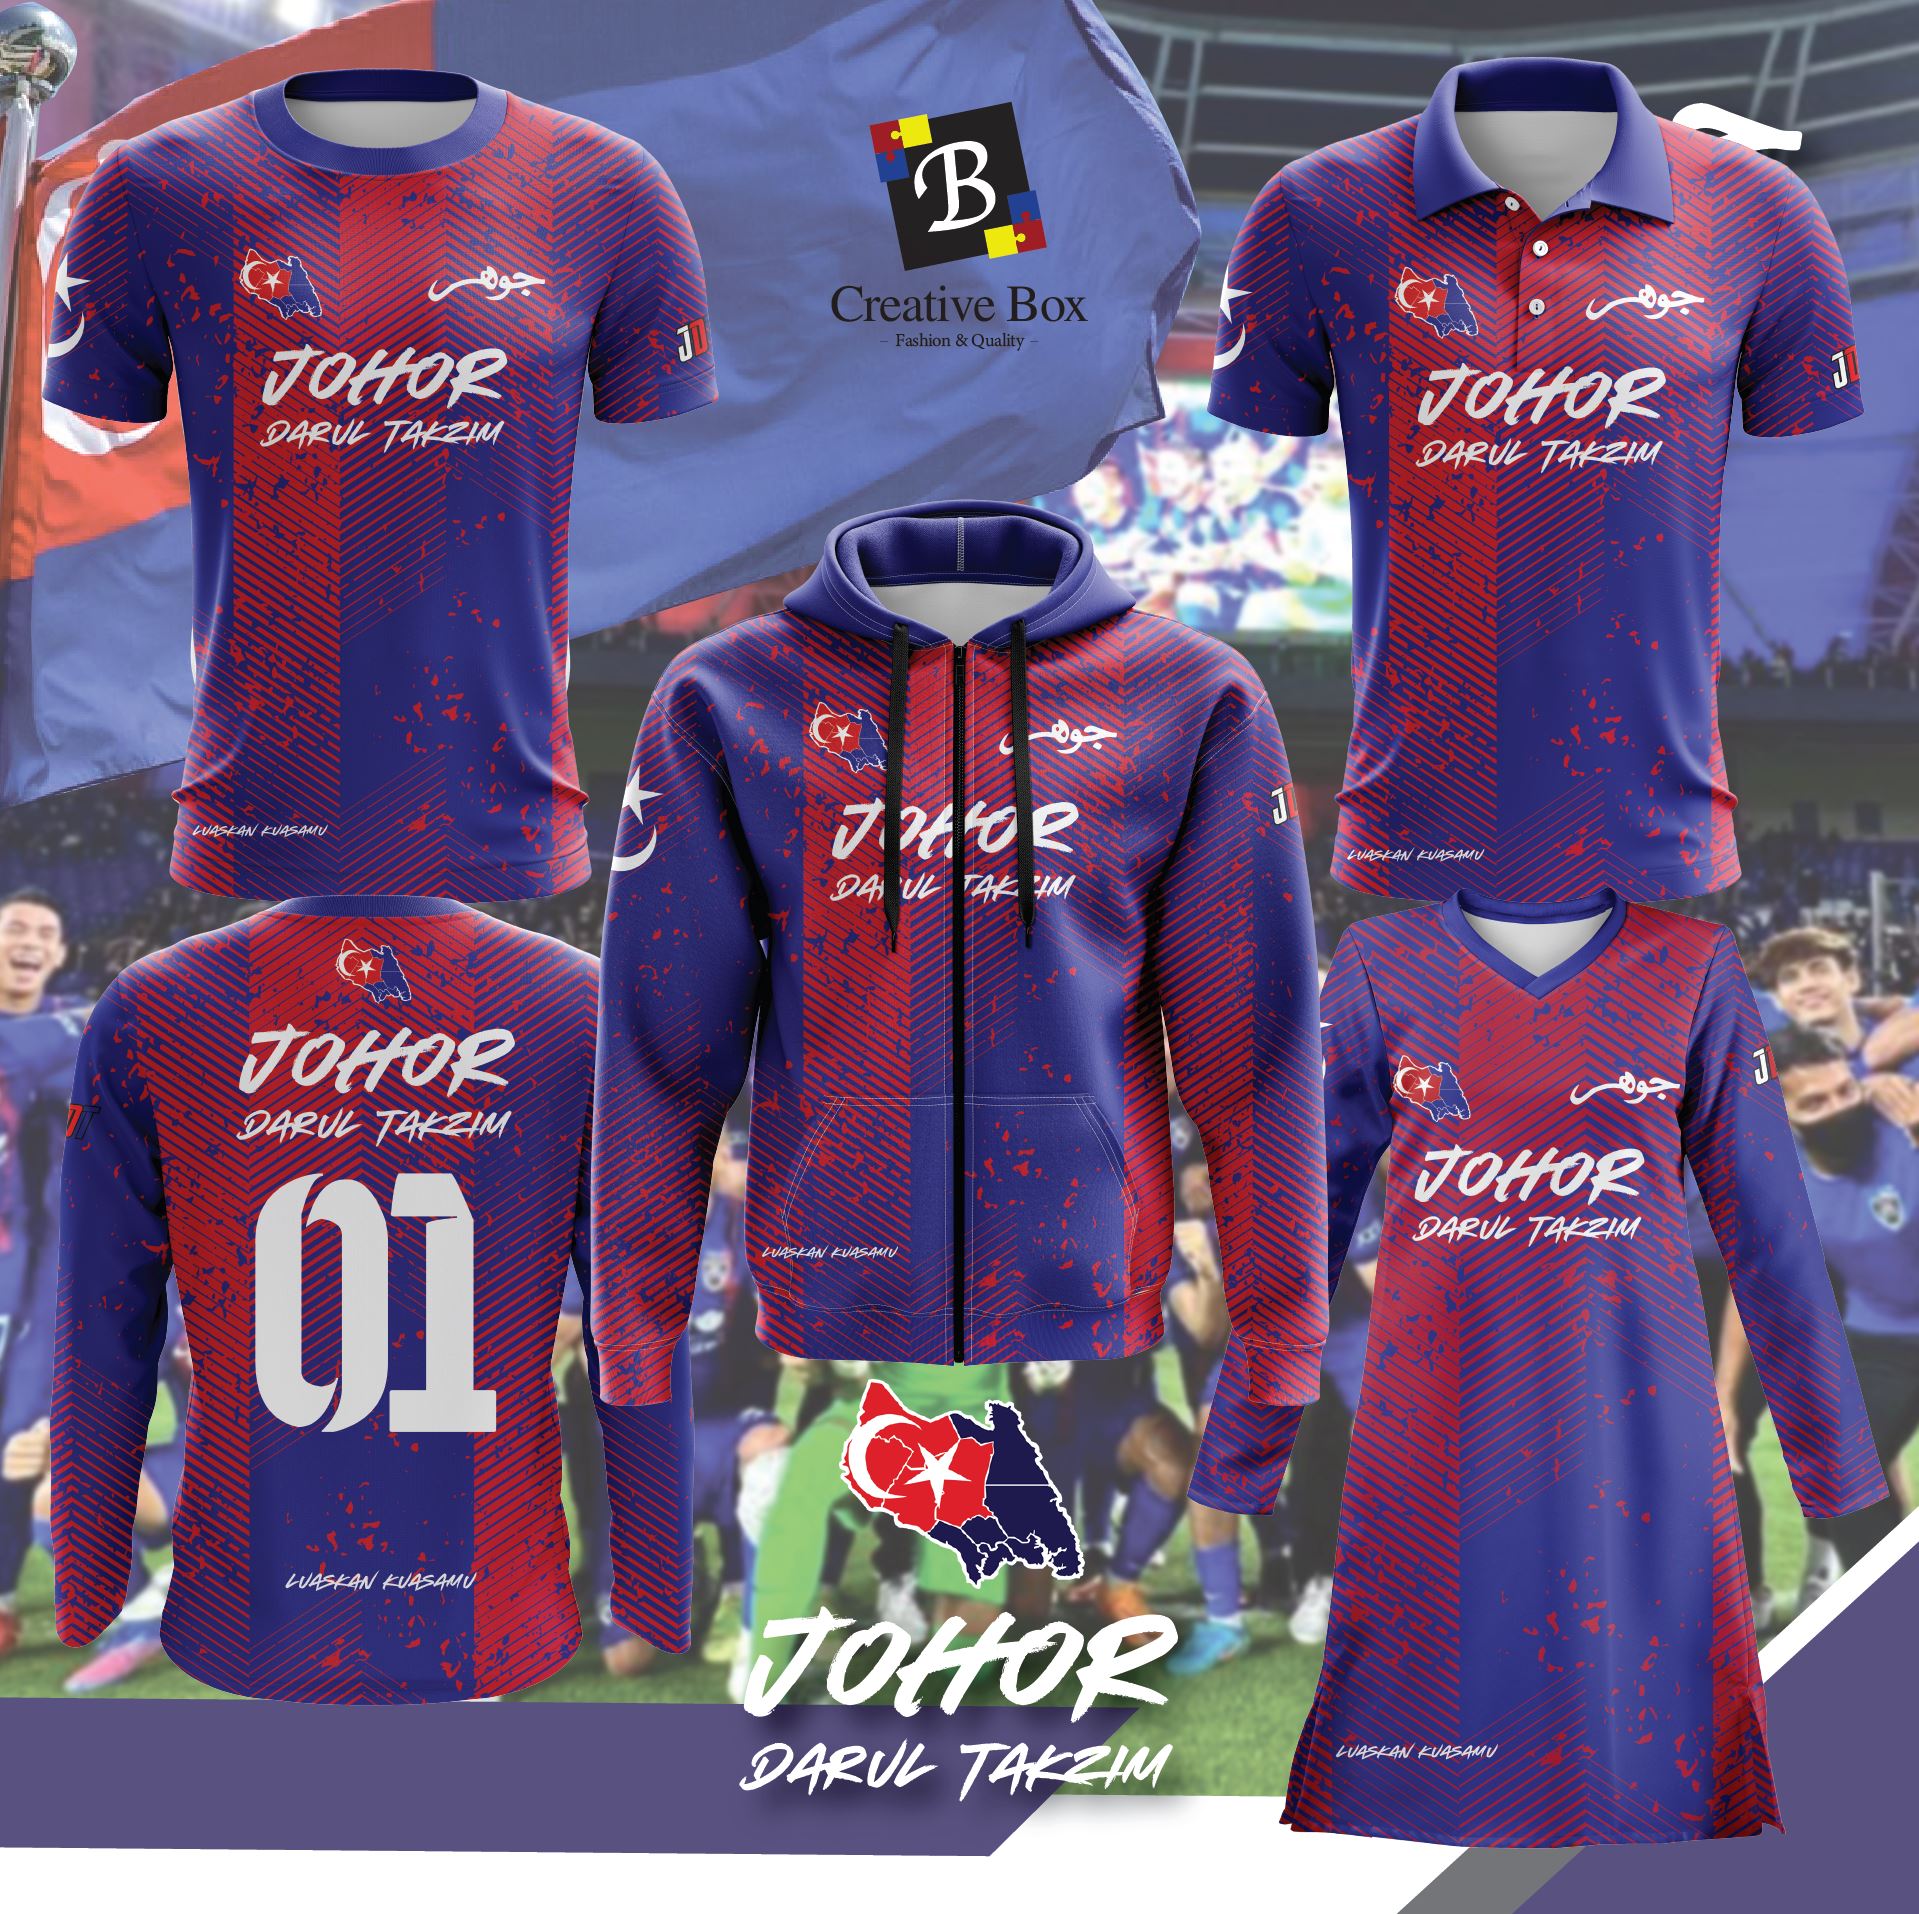 Limited Edition Johor Jersey and Jacket #04